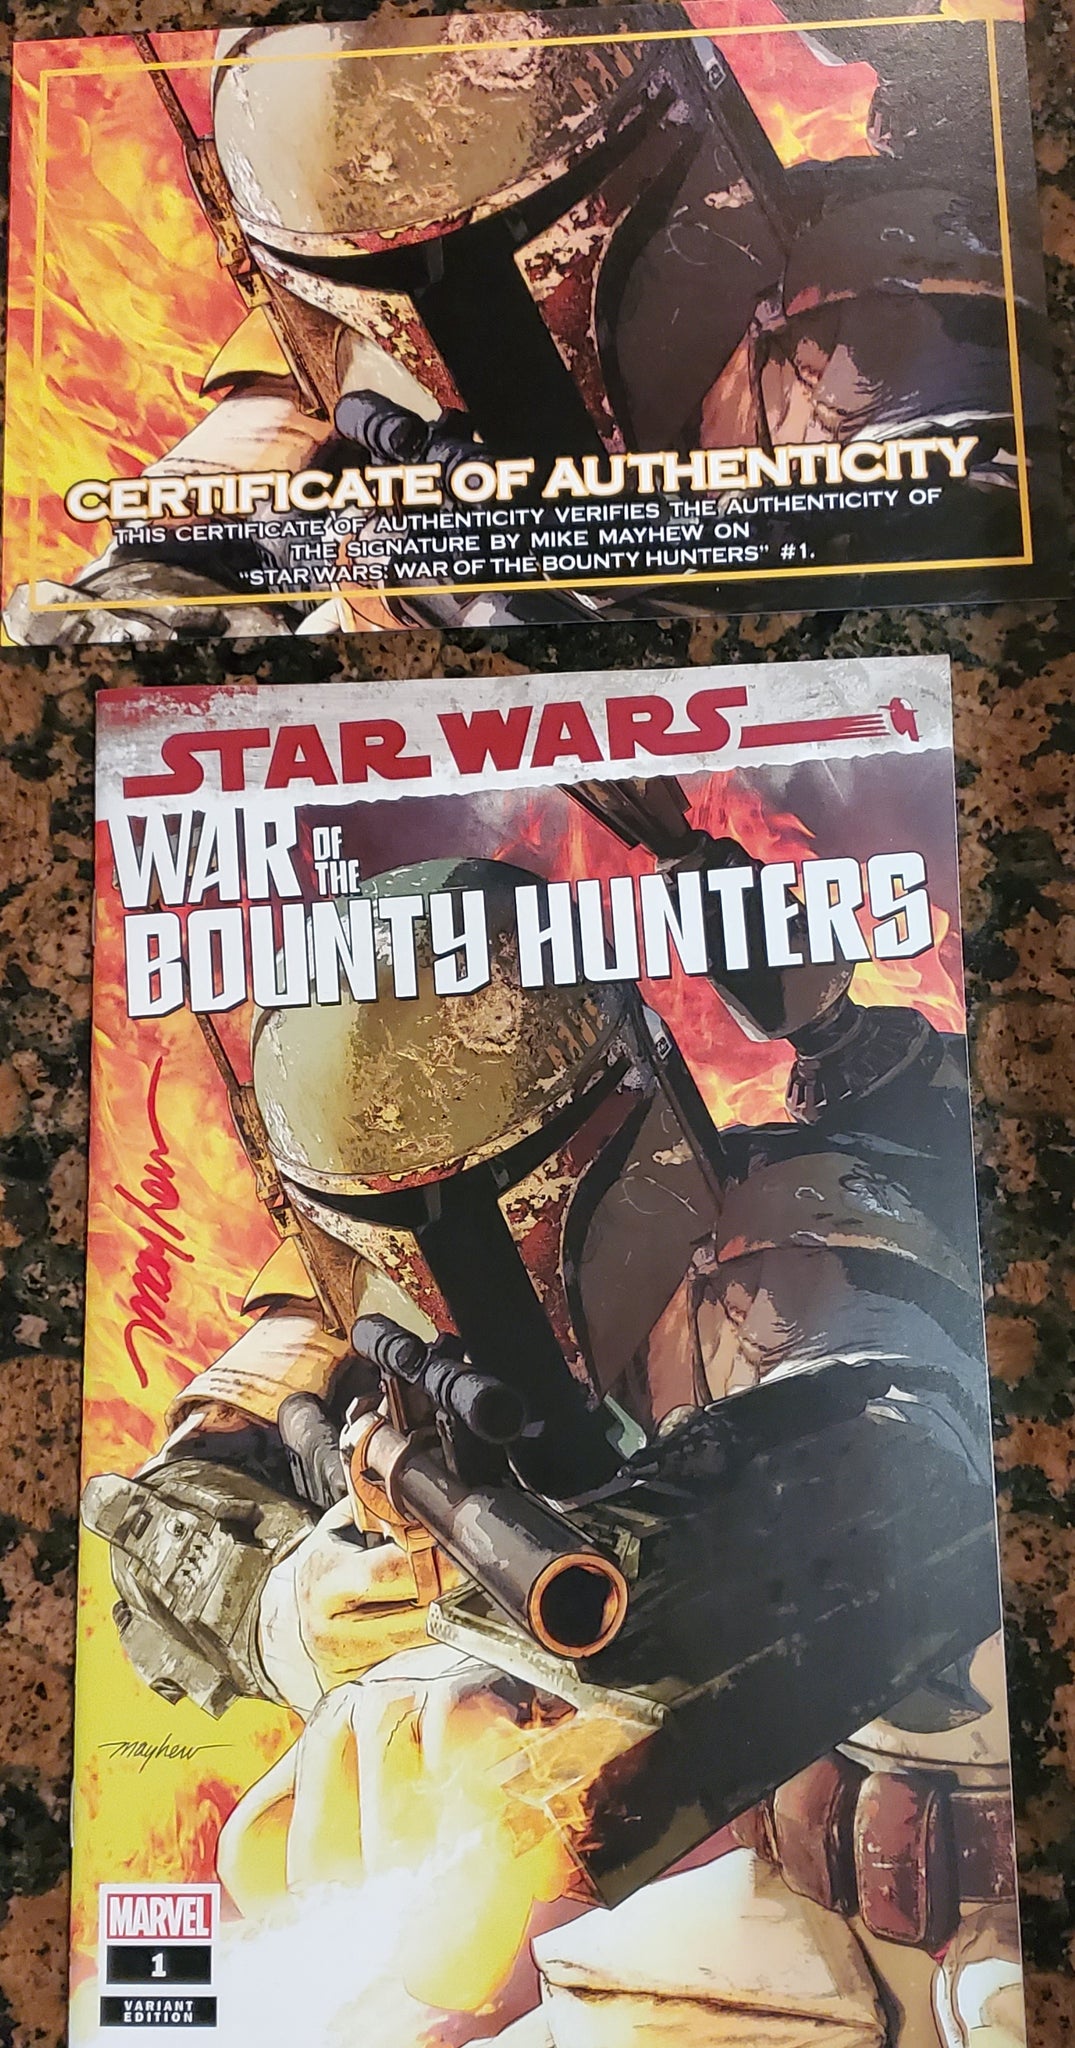 STAR WARS WAR OF THE BOUNTY HUNTERS #1 MIKE MAYHEW SIGNED COA TRADE DRESS VARIANT-A